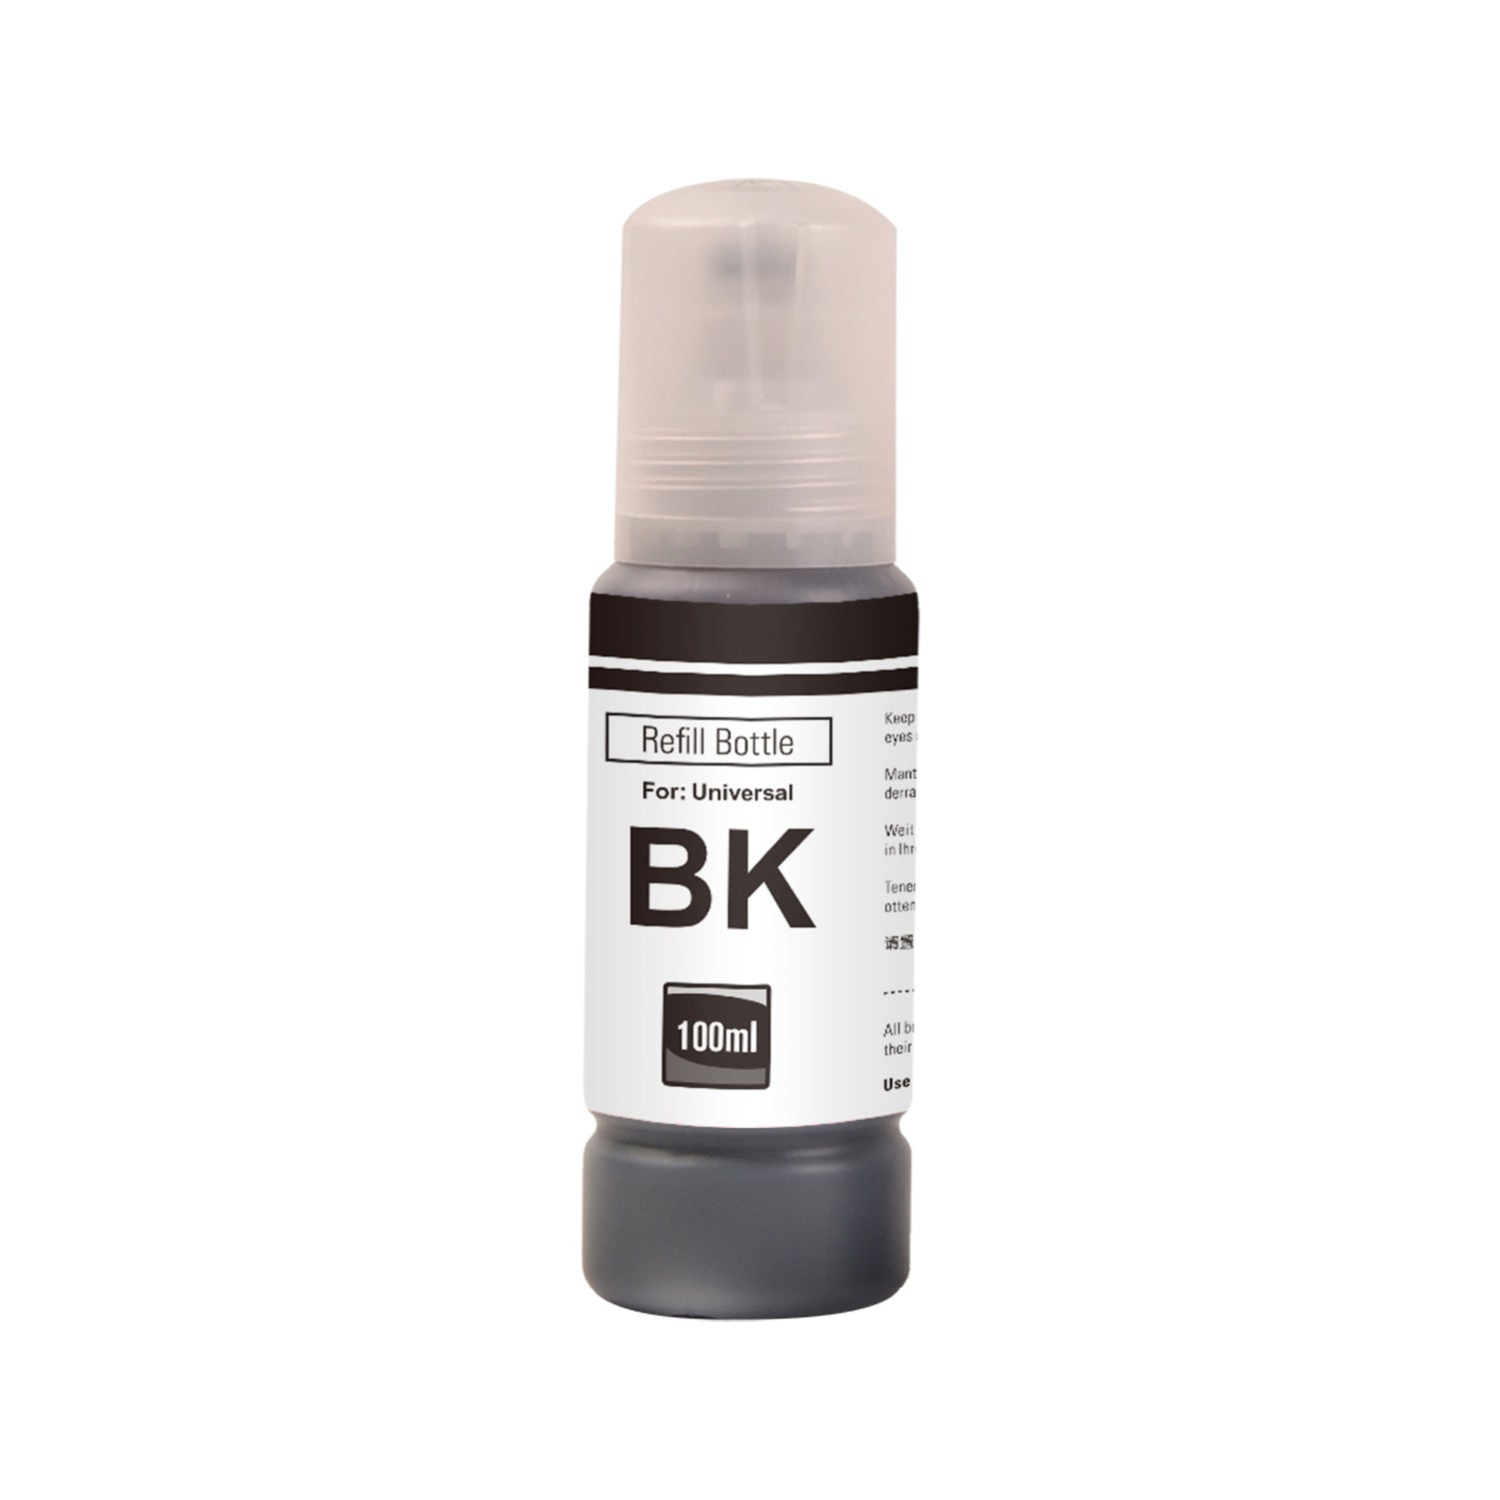 Compatible Epson T522 T522120-S Black Ink Bottle by Superink